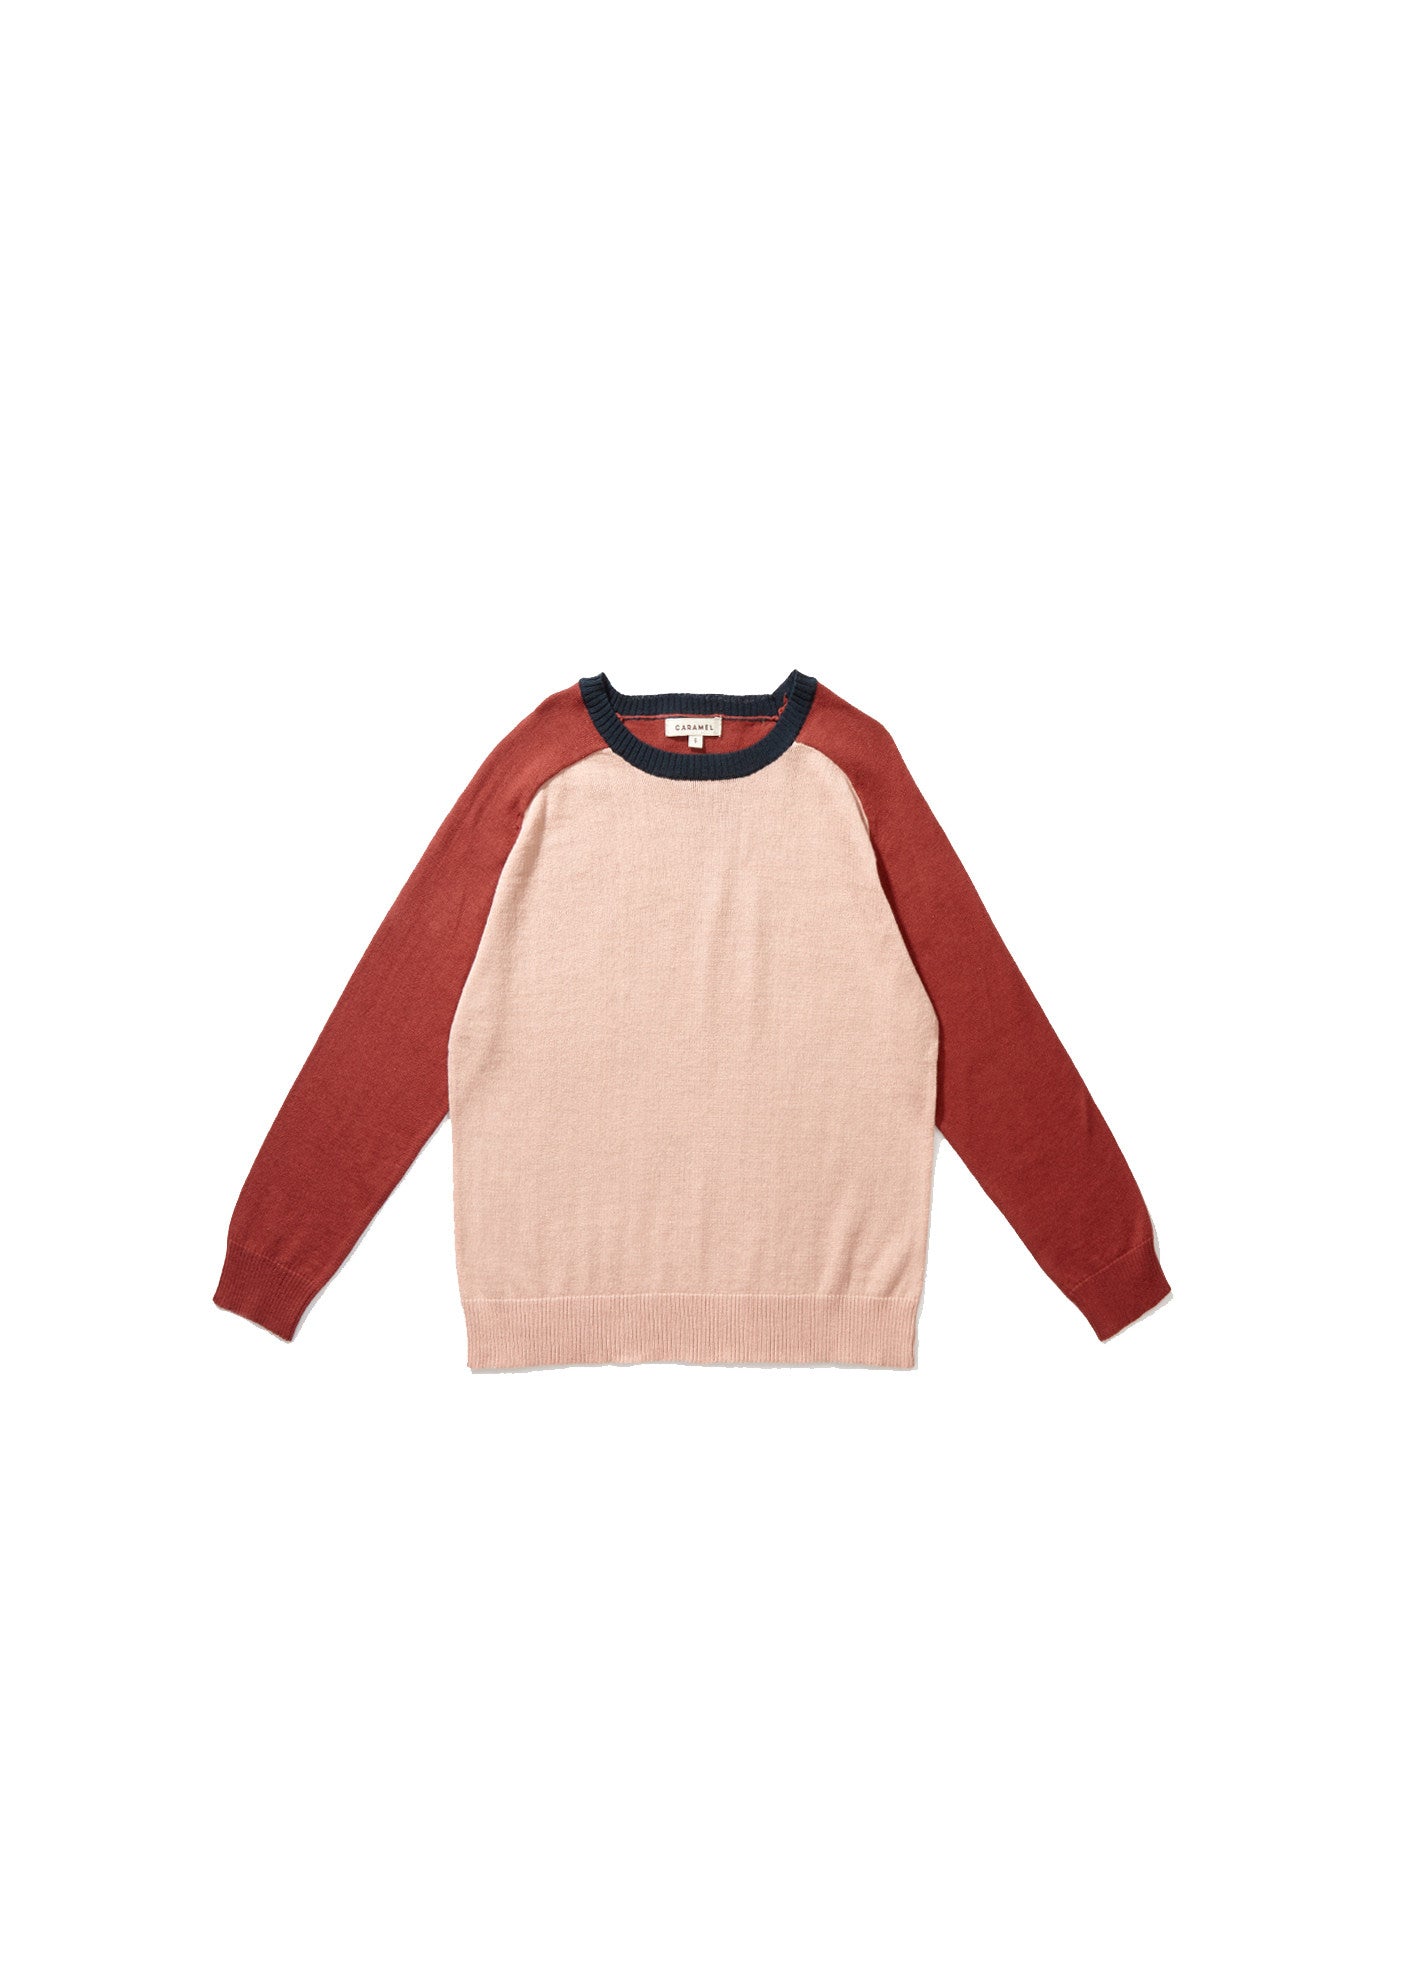 Boys Multicolor Cotton Knitted Sweater